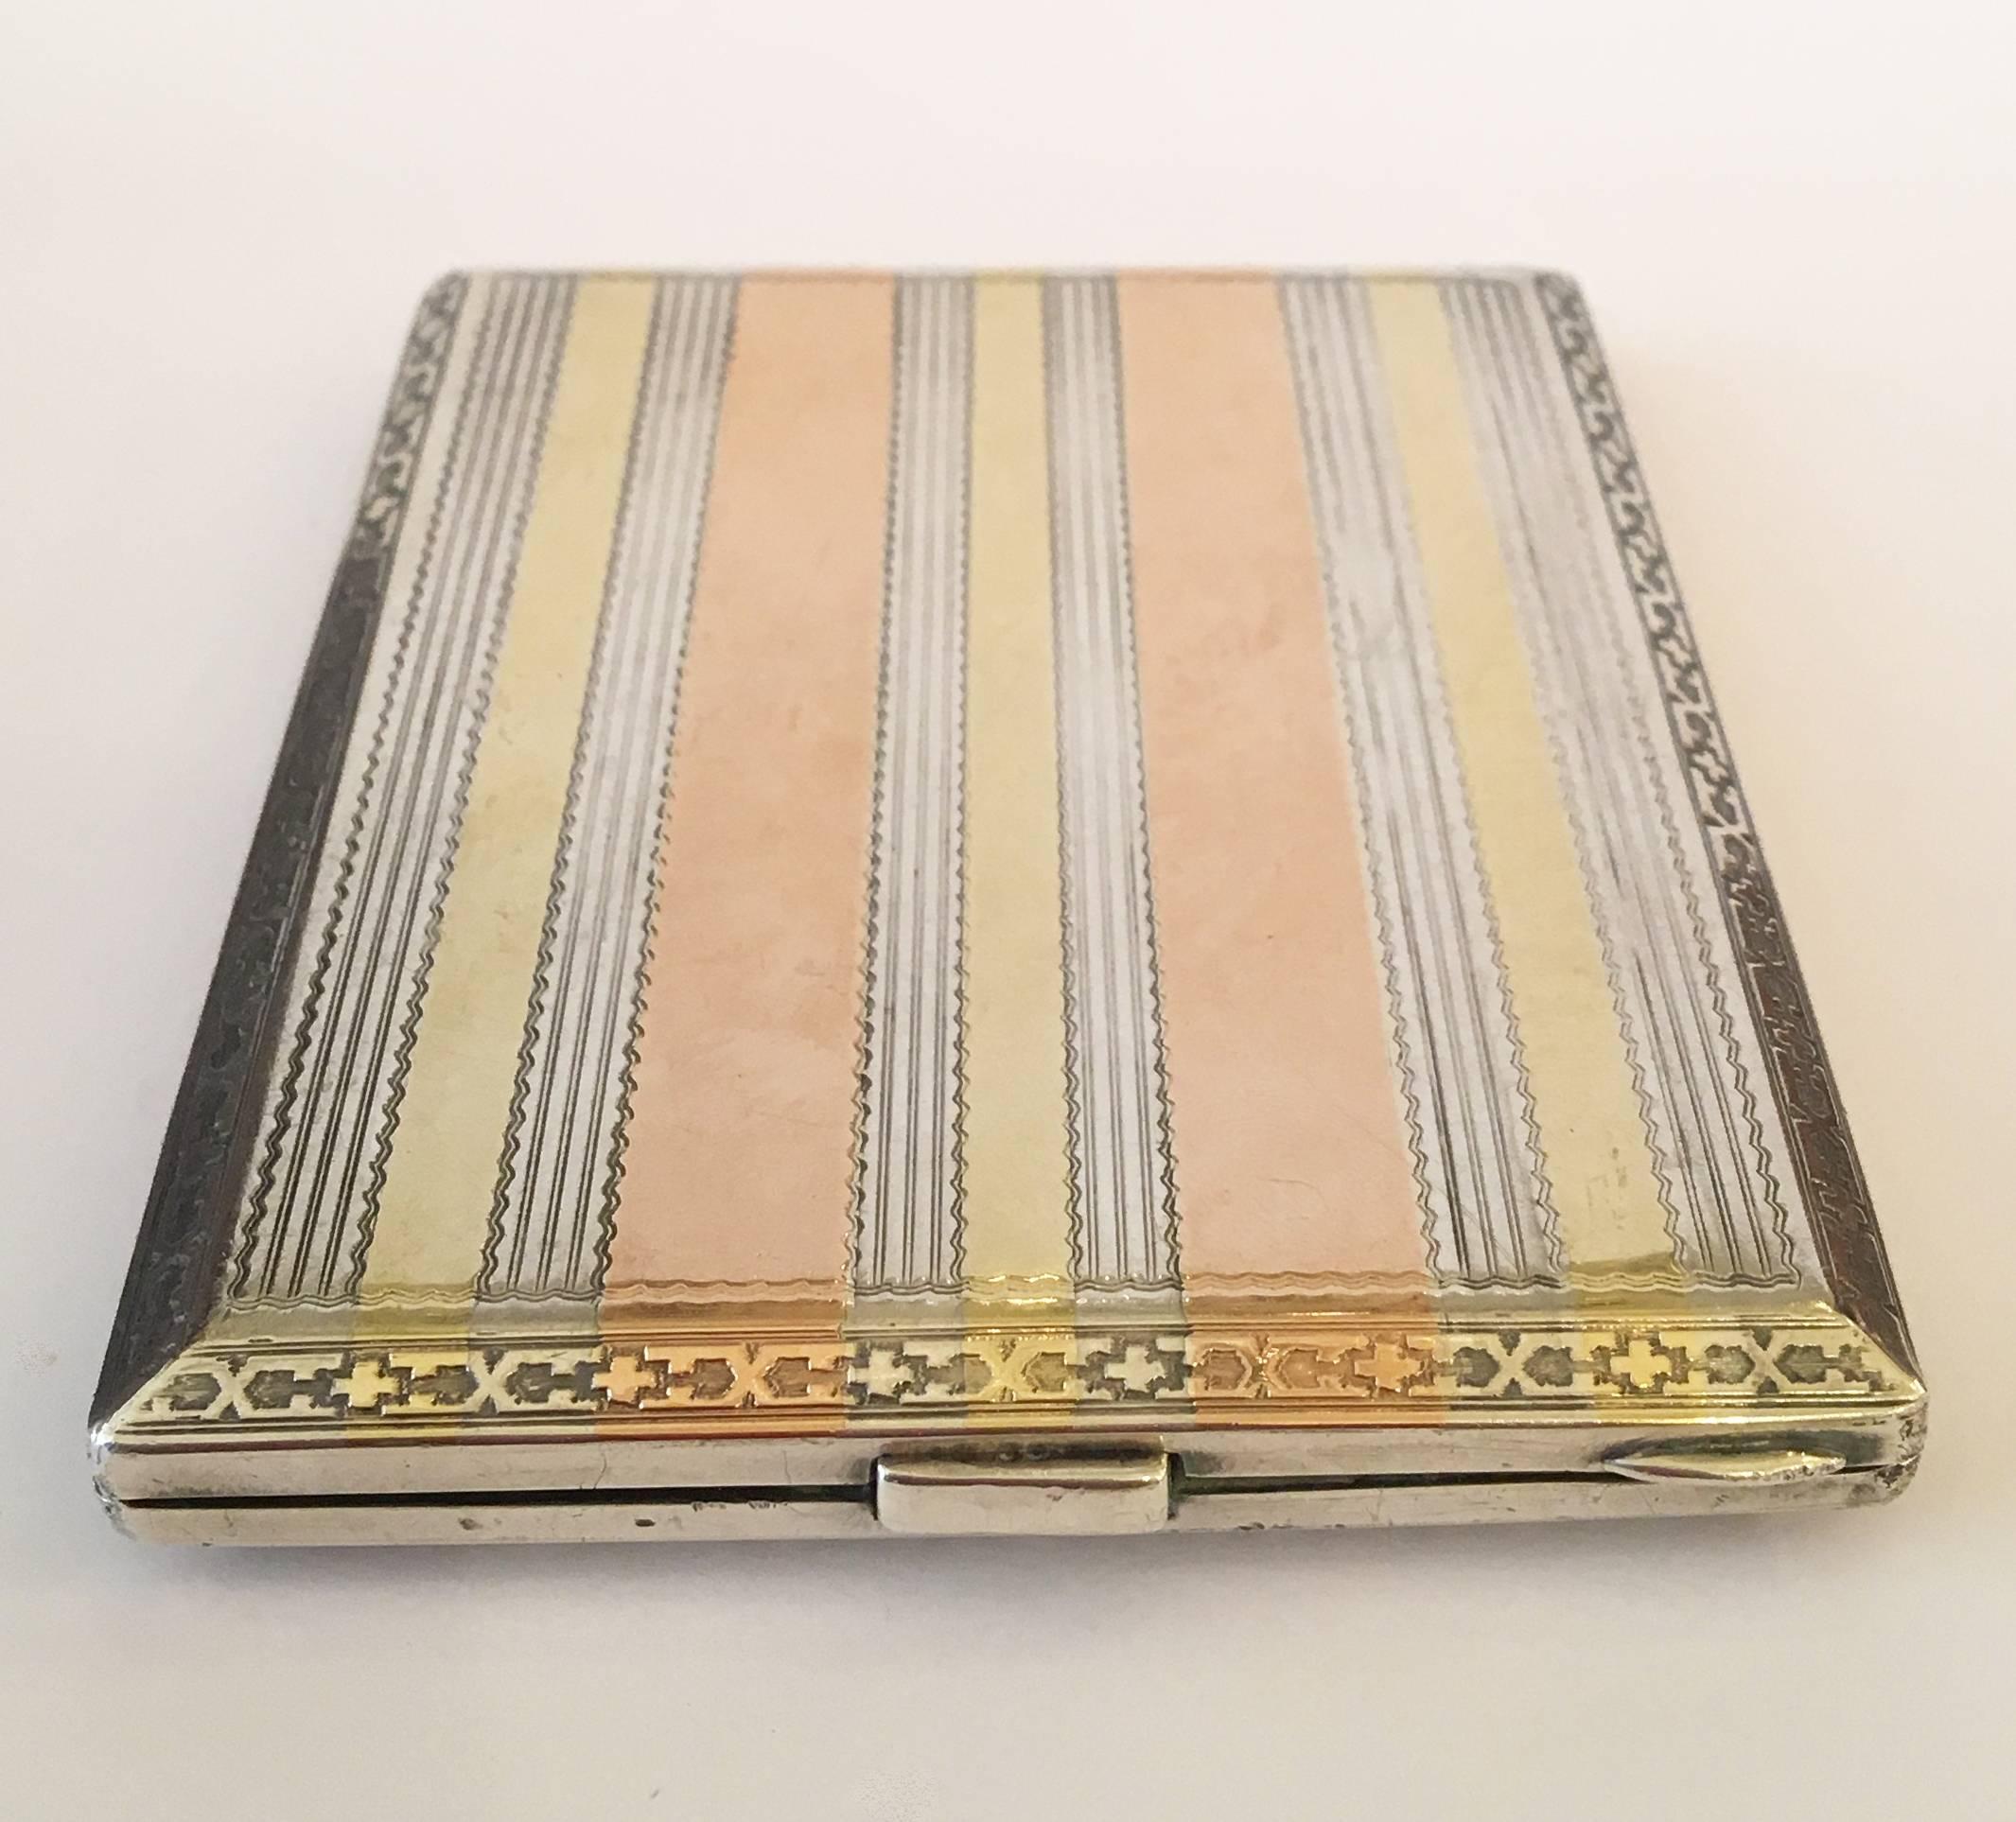 This early 20th century sterling silver Hermès cigarette box can also be used as a modern day business card holder. The case is sterling silver with gold and rose gold inlay. Marked 